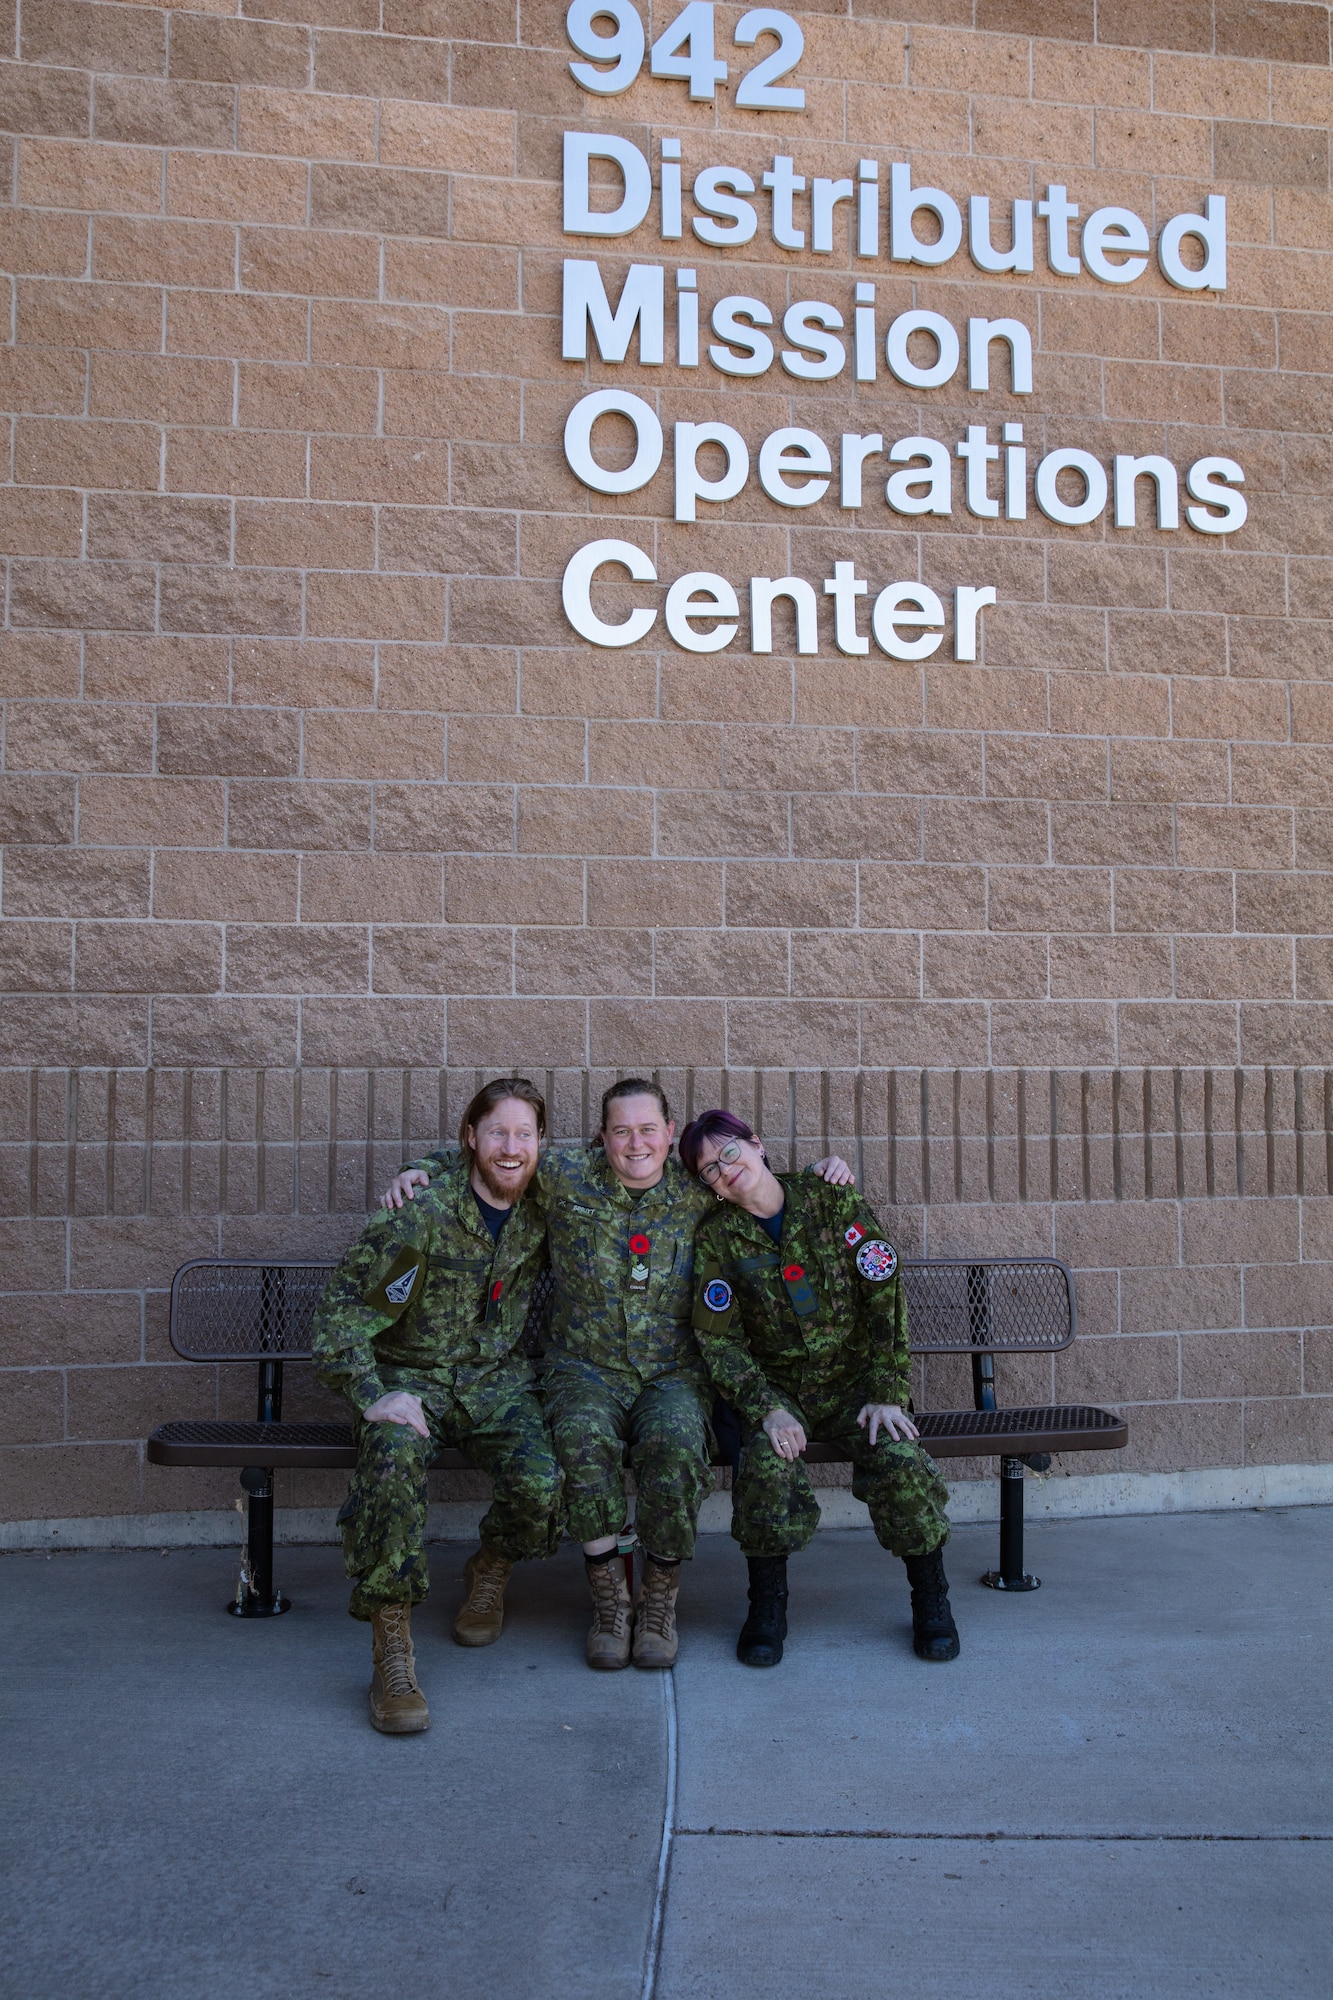 uniformed coalition military members stand sit on a bench in front of brick building with lettering “942 Distributed Mission Operations Center”